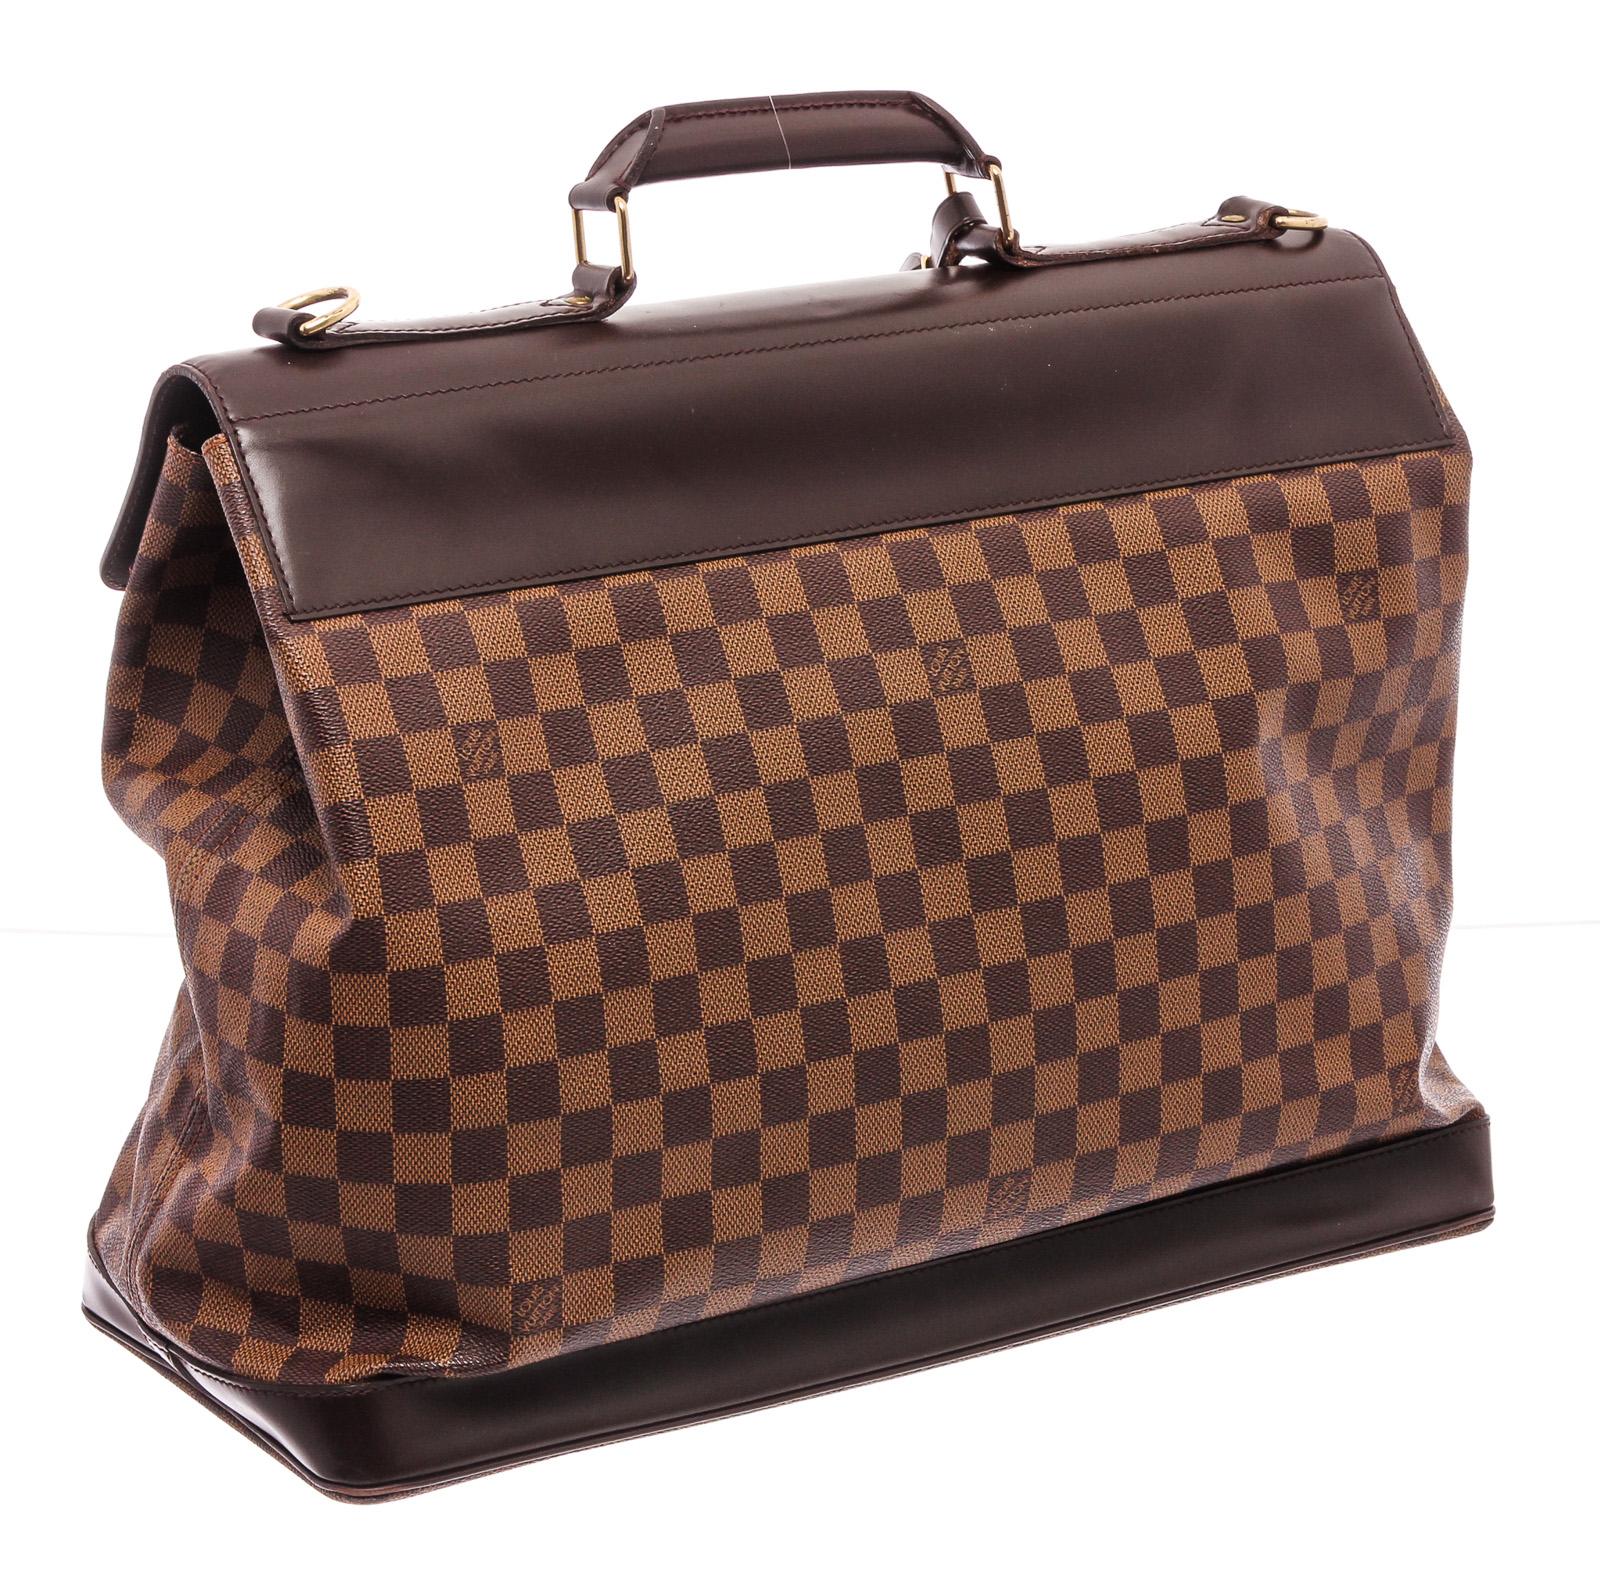 Damier Ebene coated canvas Louis Vuitton West End PM with brass hardware, single rolled top handle, optional flat shoulder strap, moka leather trim, terracotta canvas lining, single zip pocket at interior and dual buckle closures at front.

22117MSC